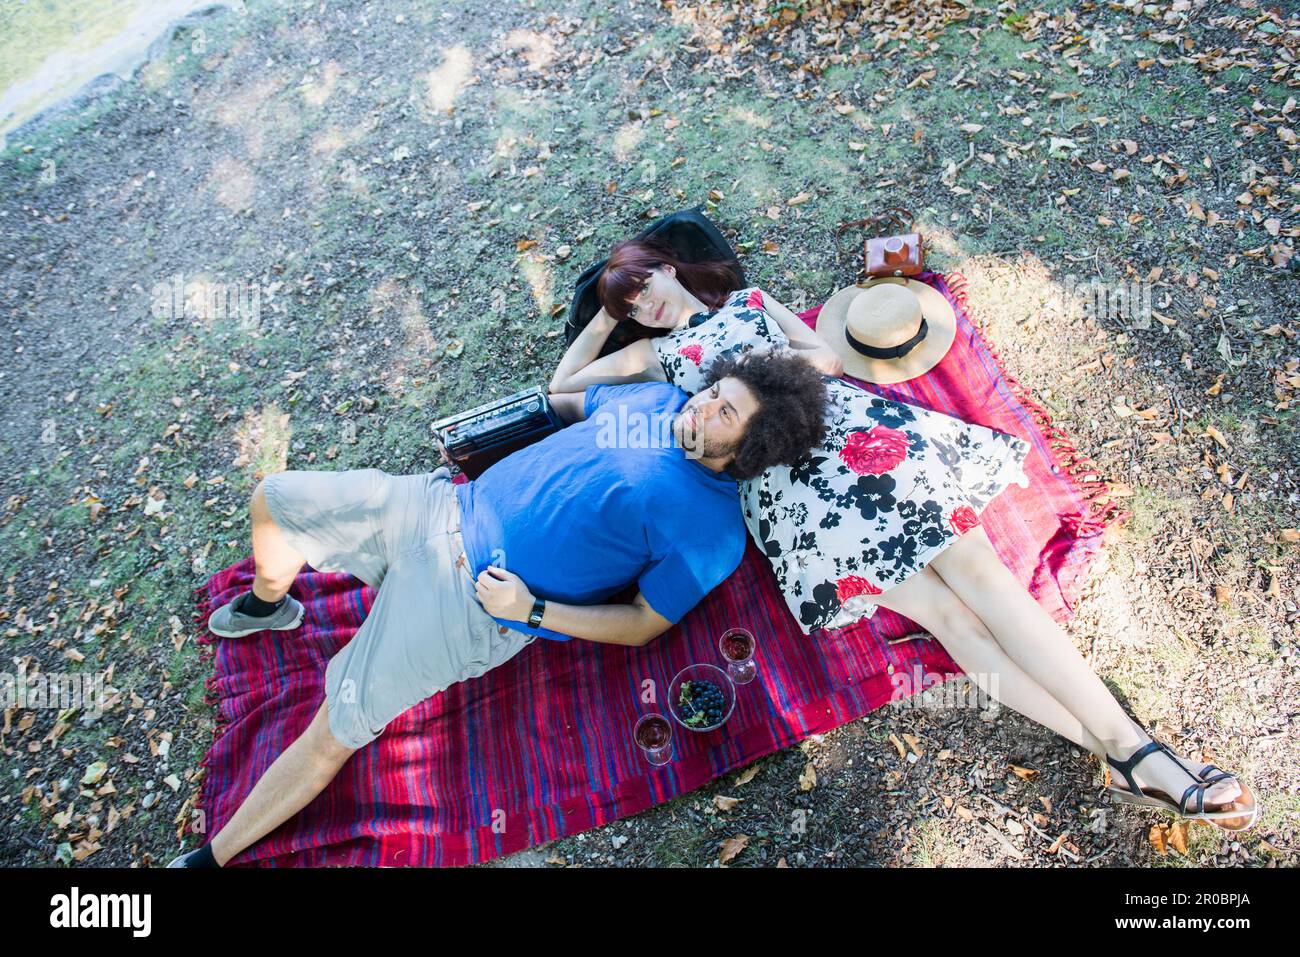 Young couple relaxing on picnic blanket Stock Photo